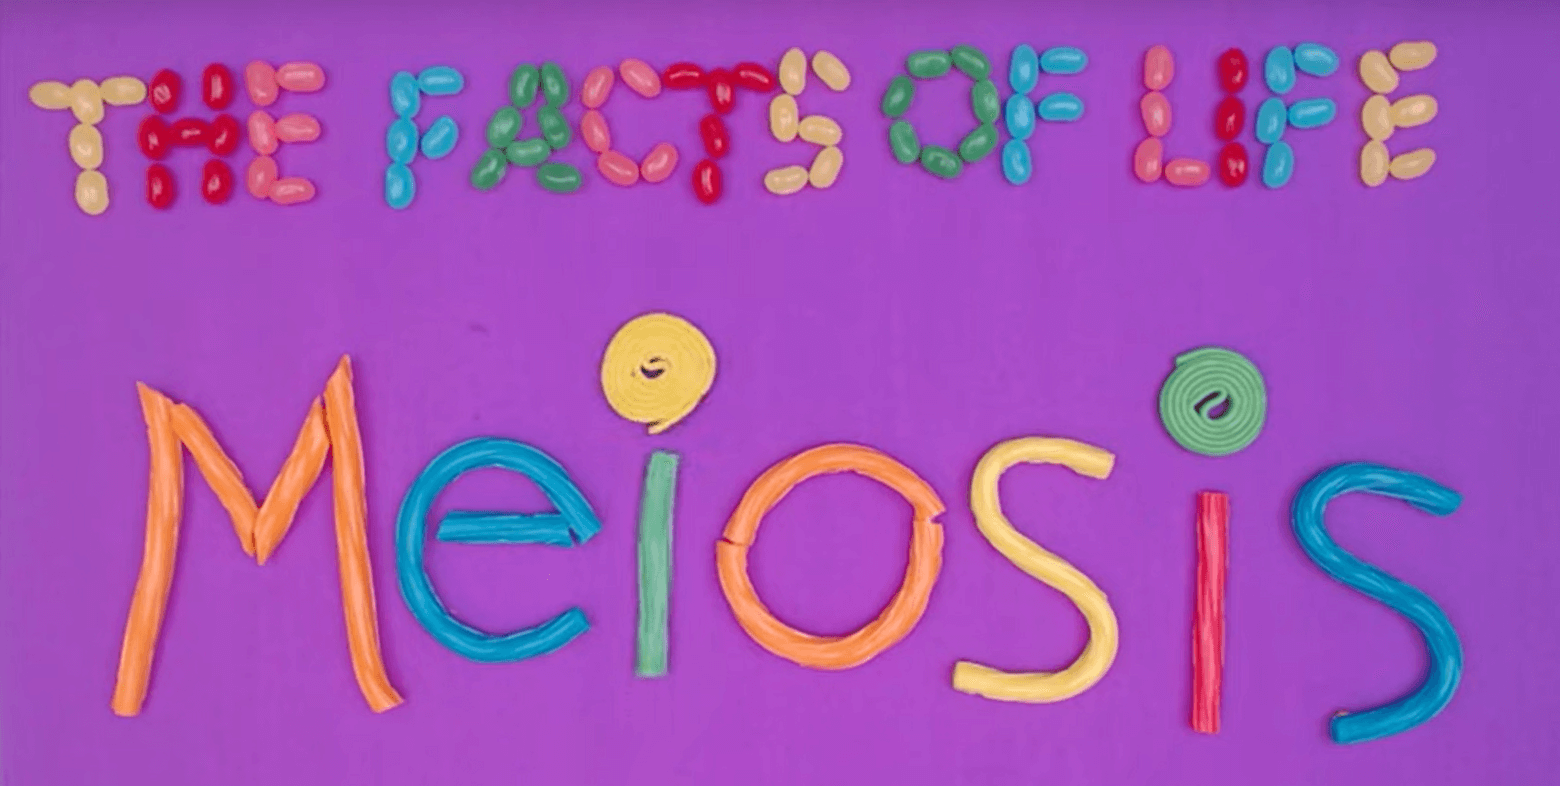 Title image of one of the videos that reads "The facts of life: Meiosis"